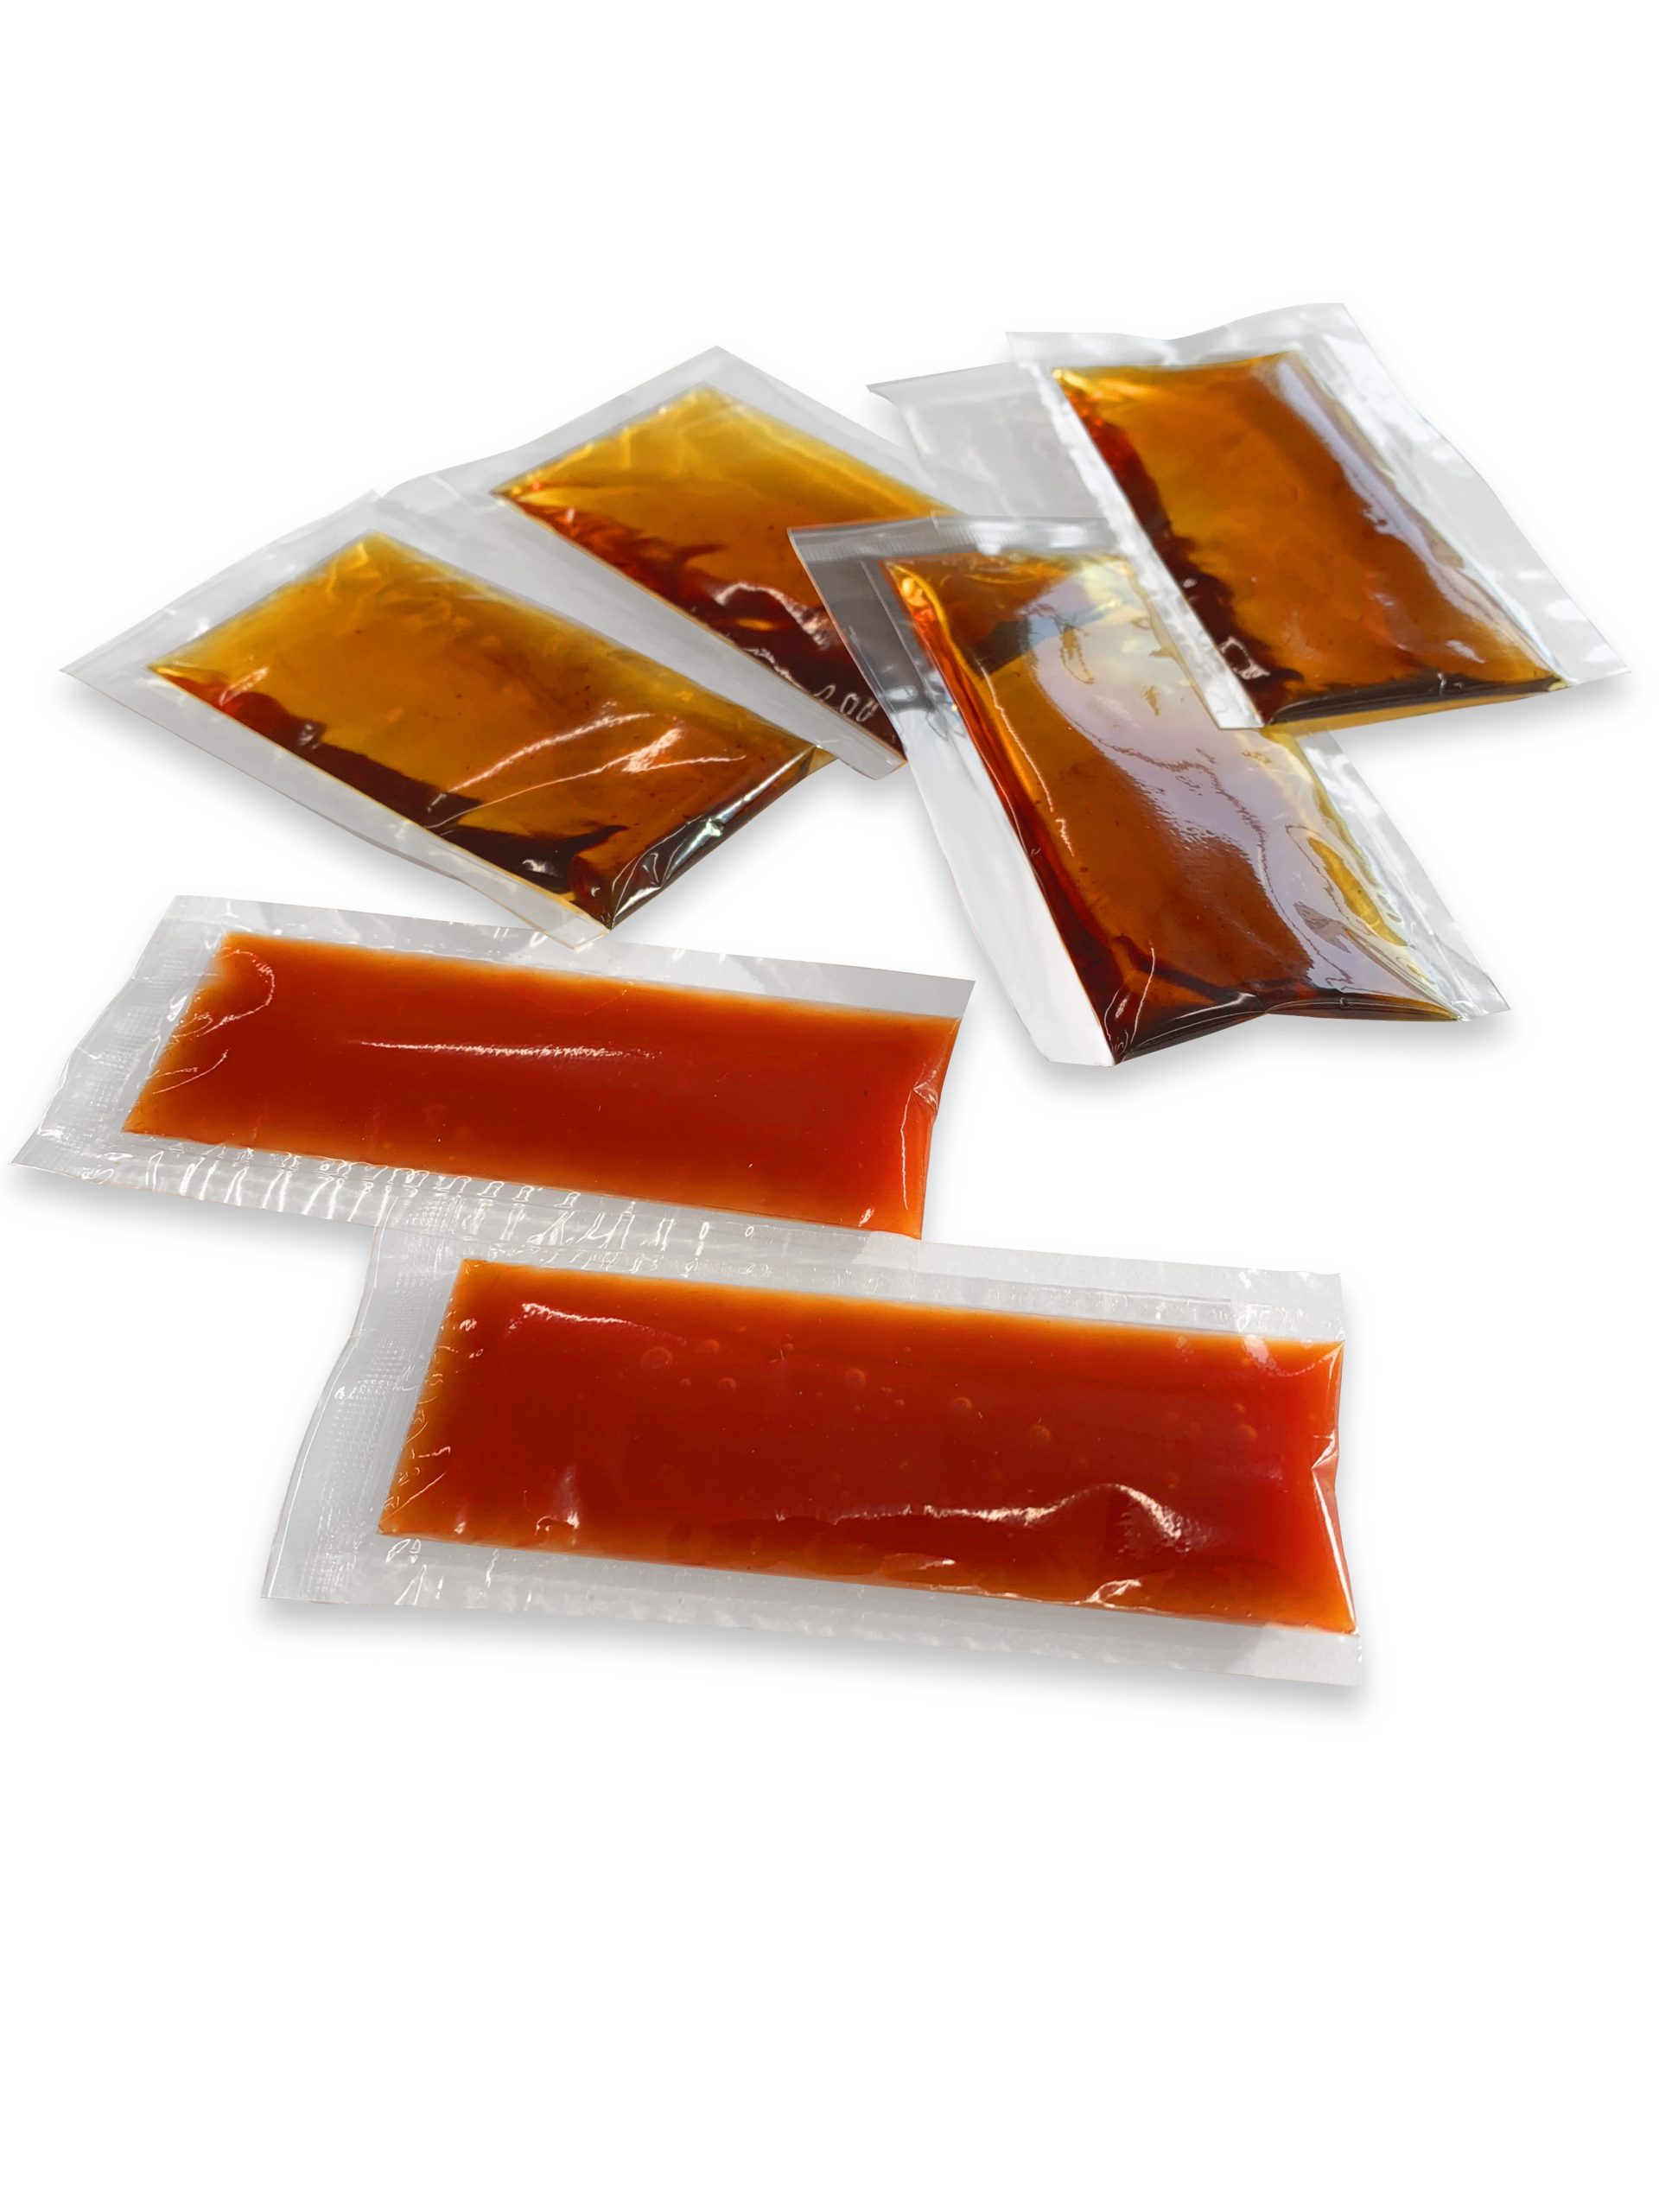 Sauce in clear packets